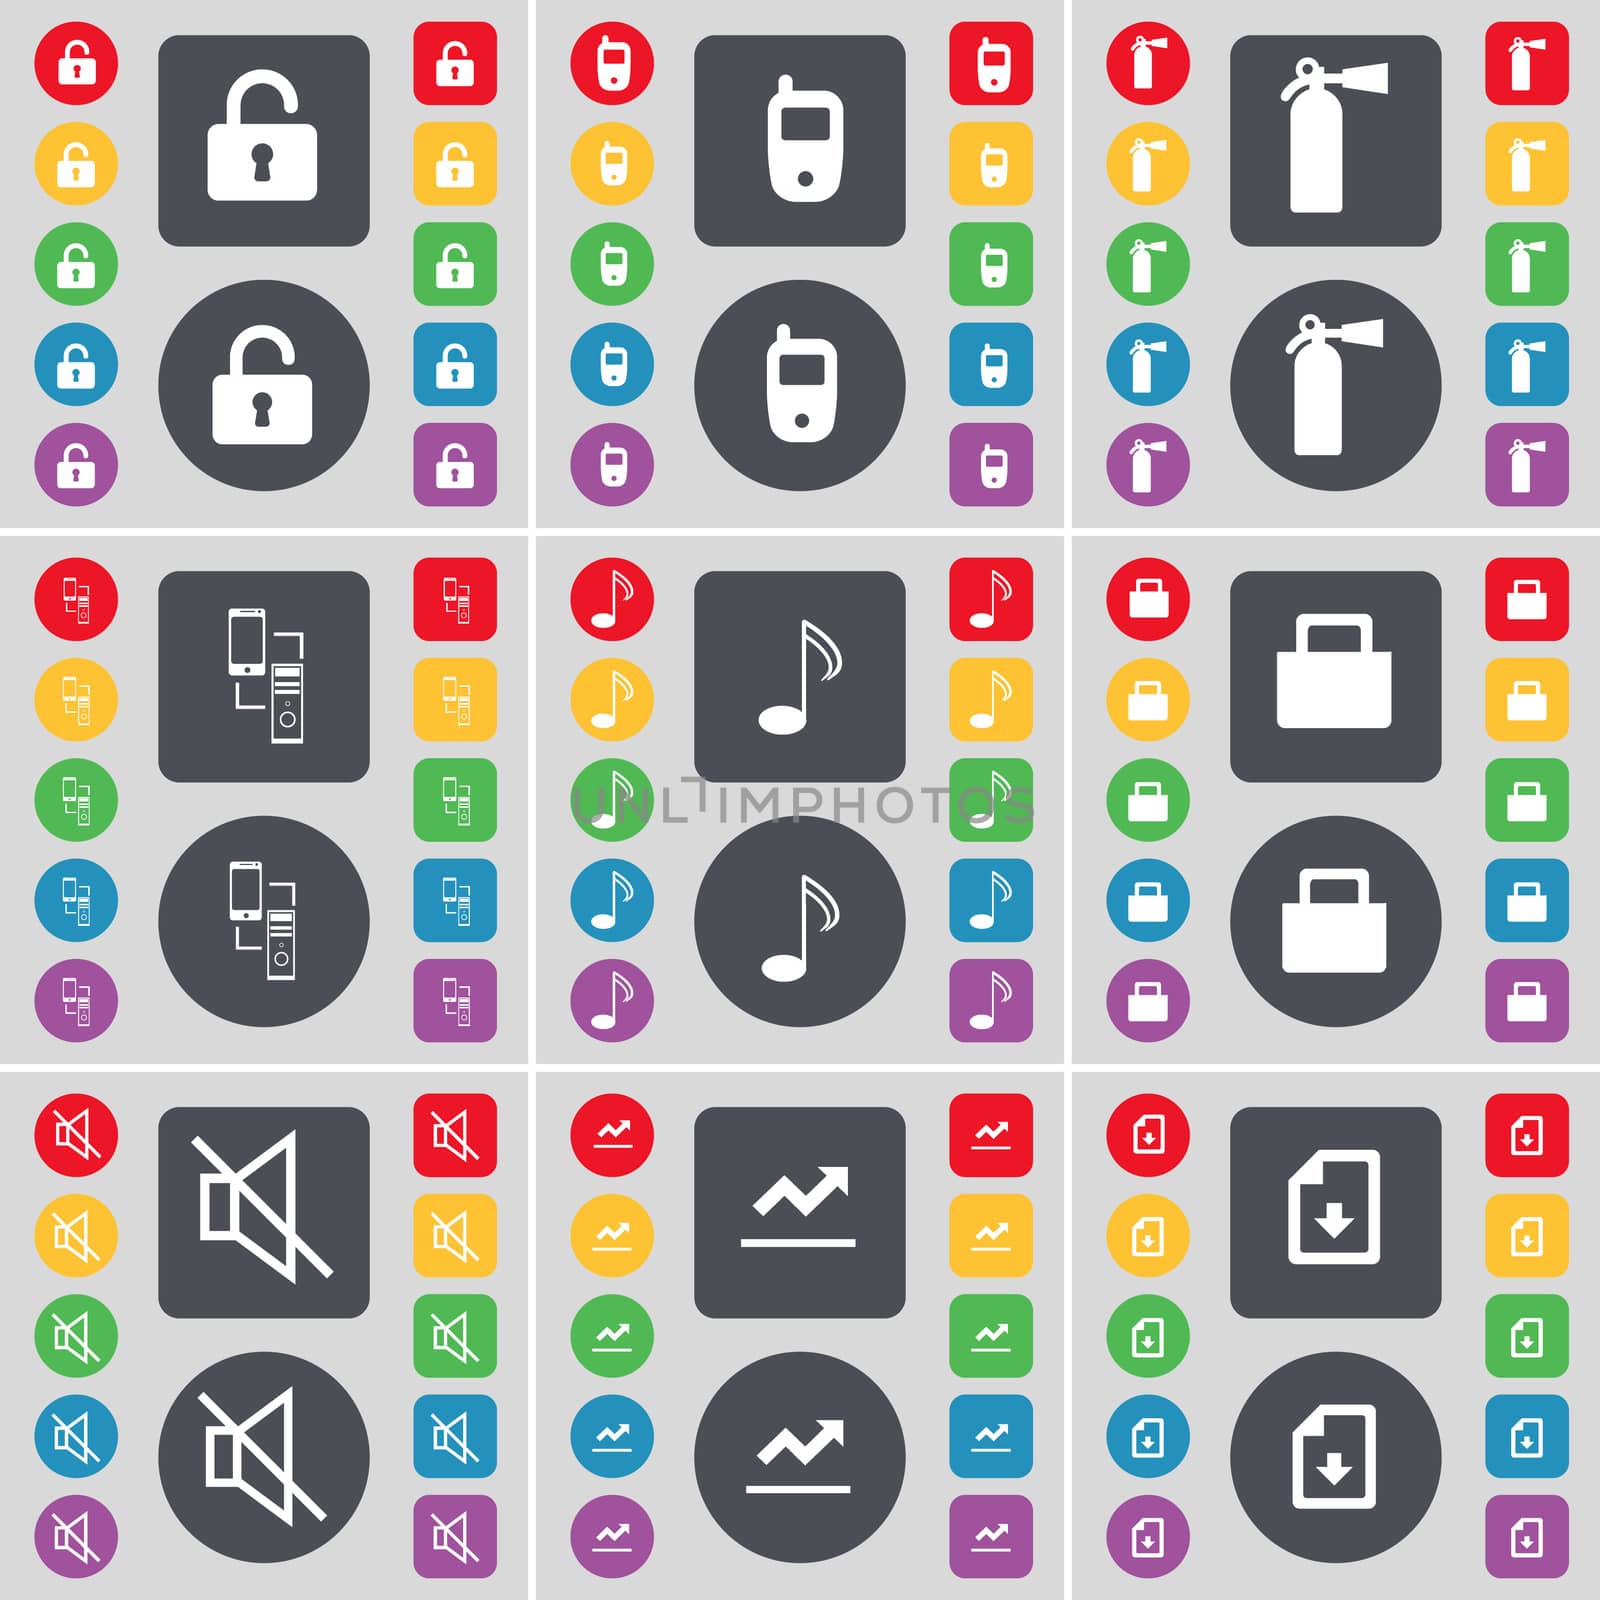 Lock, Mobile phone, Fire extinguisher, Connection, Note, Lock, Mute, Graph, File icon symbol. A large set of flat, colored buttons for your design.  by serhii_lohvyniuk